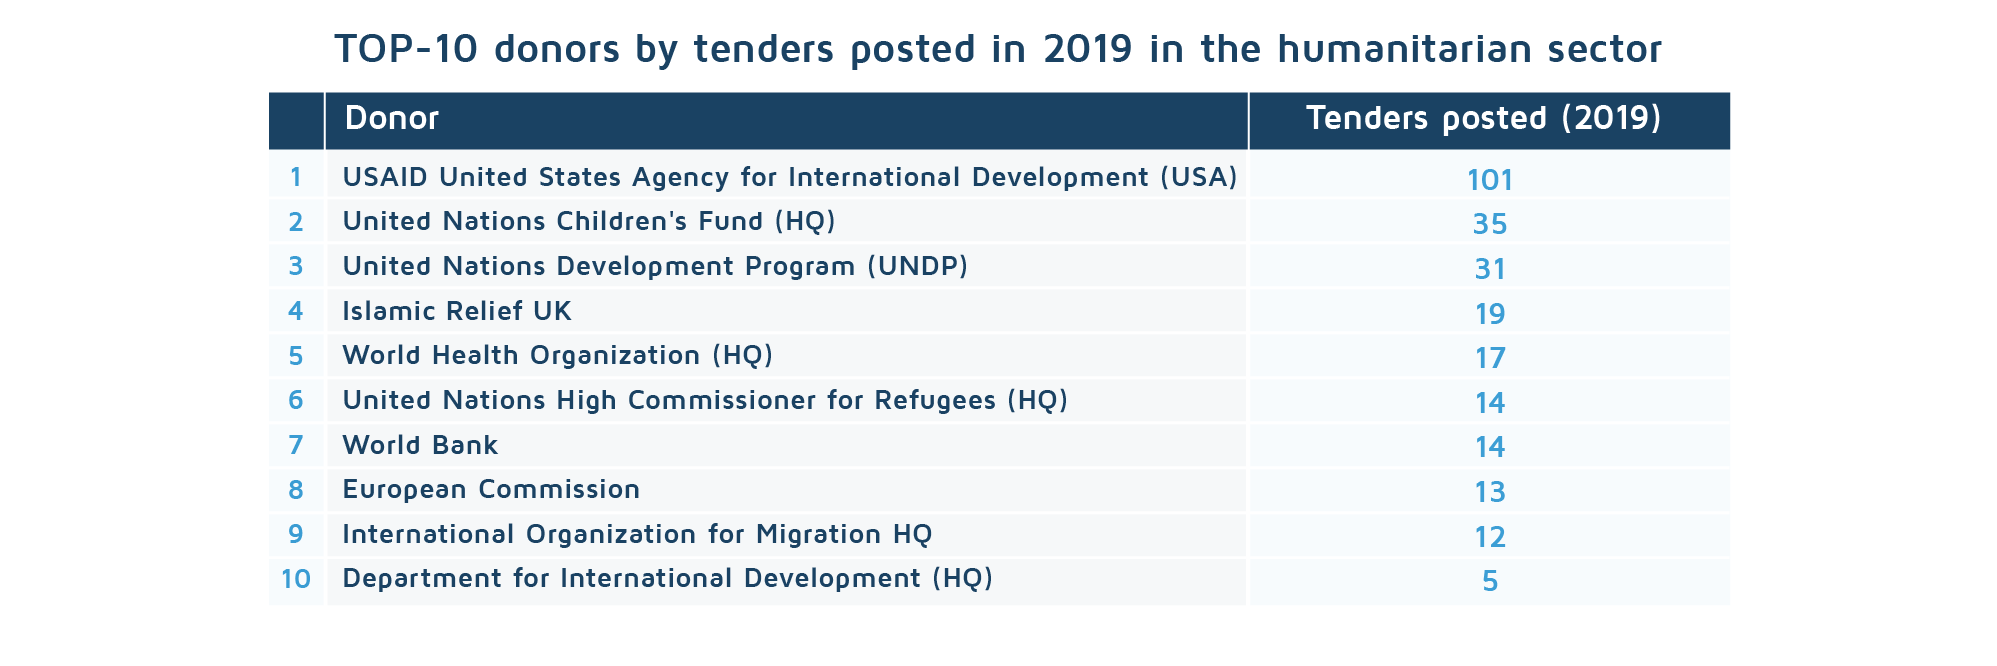 TOP-10 donors by tenders posted in 2019 in the humanitarian sector